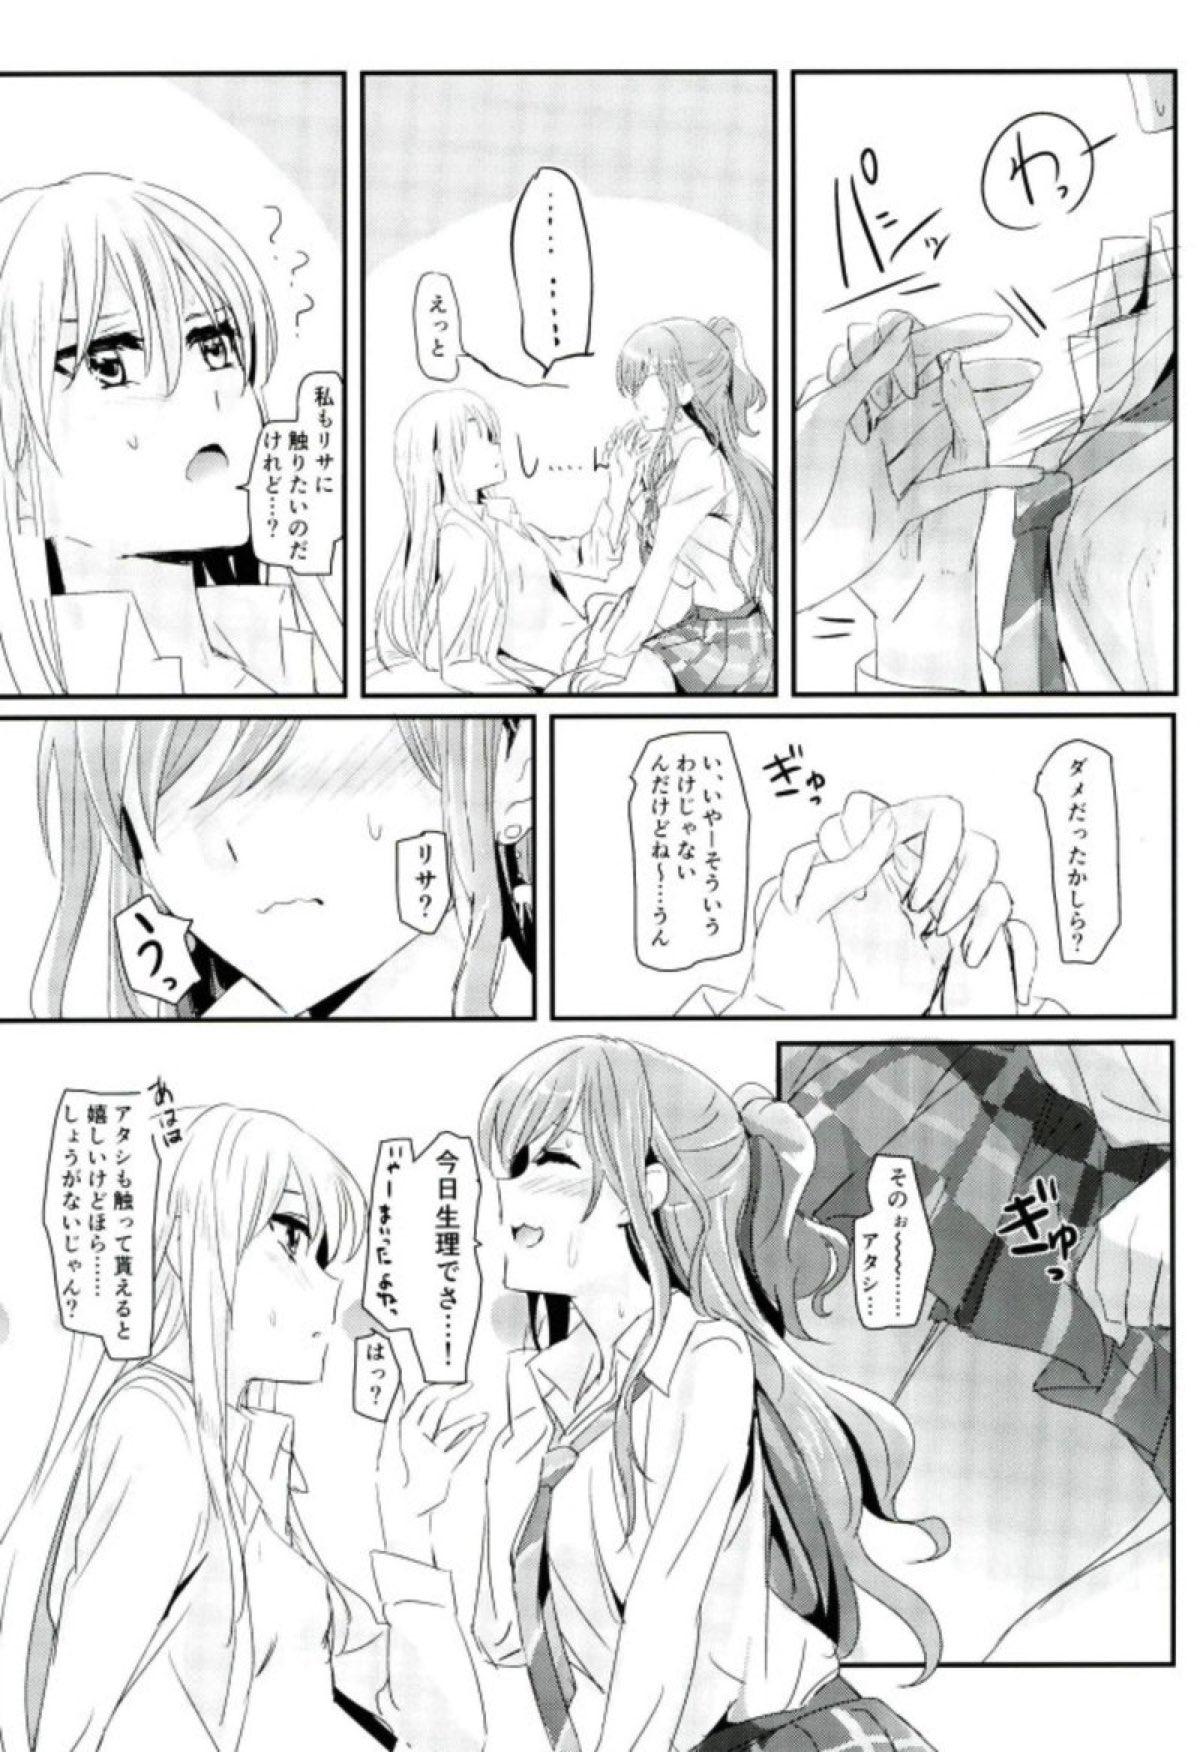 Belly reflection - Bang dream Gay College - Page 8